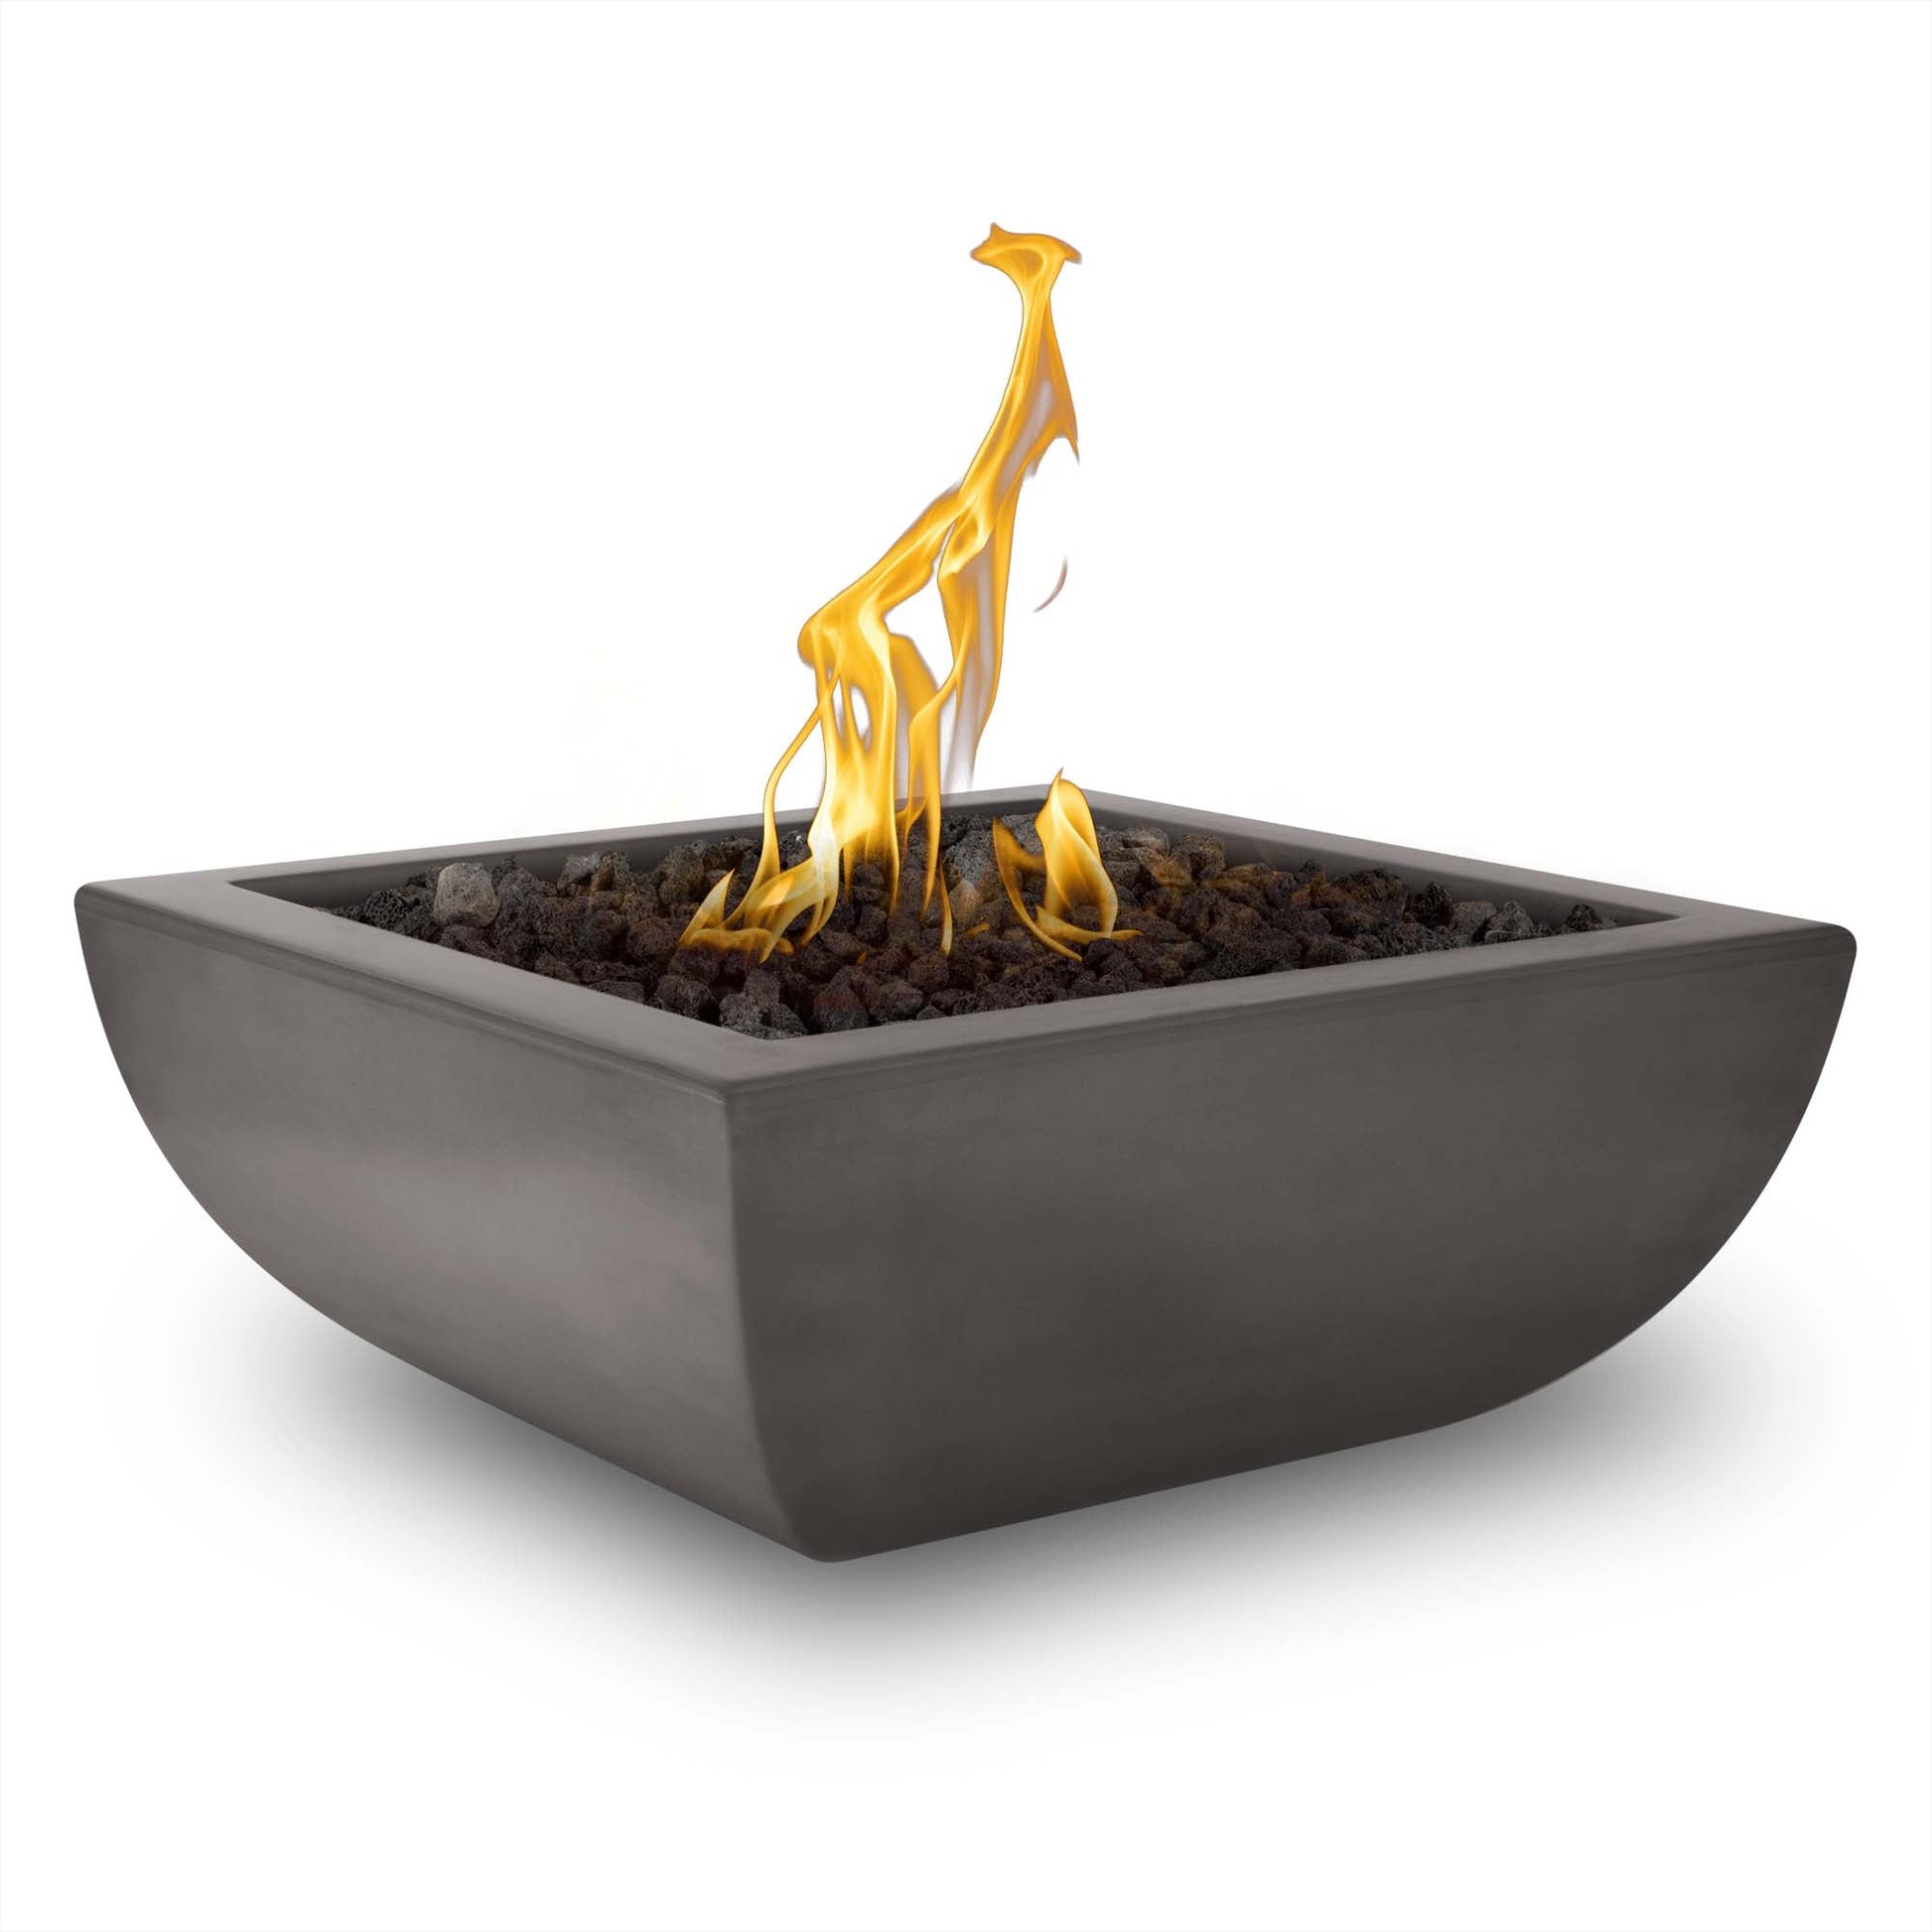 The Outdoor Plus Square Avalon 30" Chocolate GFRC Concrete Natural Gas Fire Bowl with Match Lit with Flame Sense Ignition